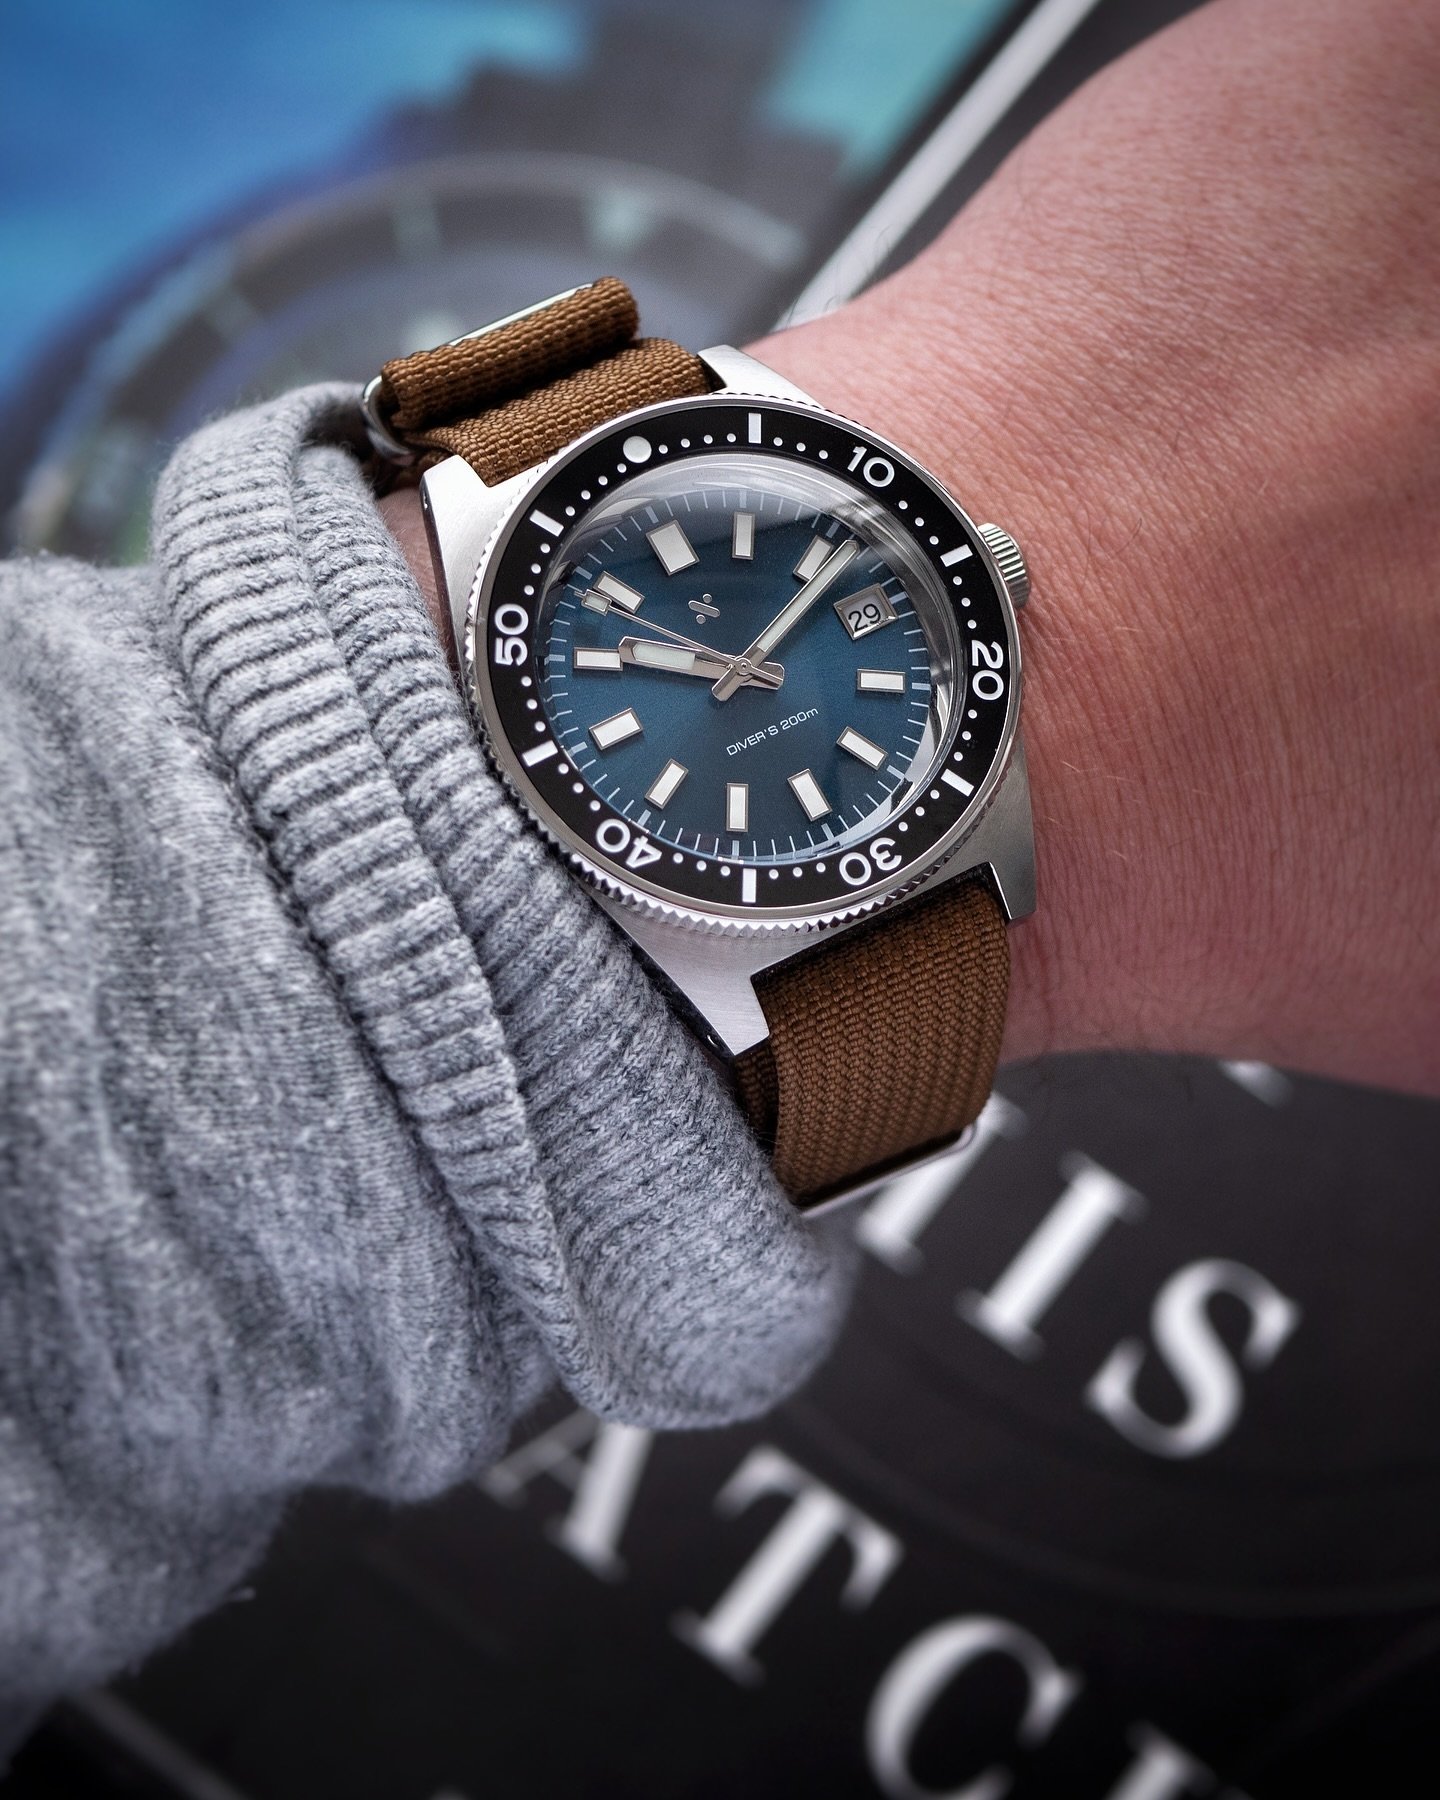 Keeping it blue for #bluewatchmonday 👌🏻😊

Namoki mods diver on wrist with a nice contrasting brown nato from my store 👌🏻

Monday starting with a bang 💥 have a fantastic week #watchfam 😊🙏